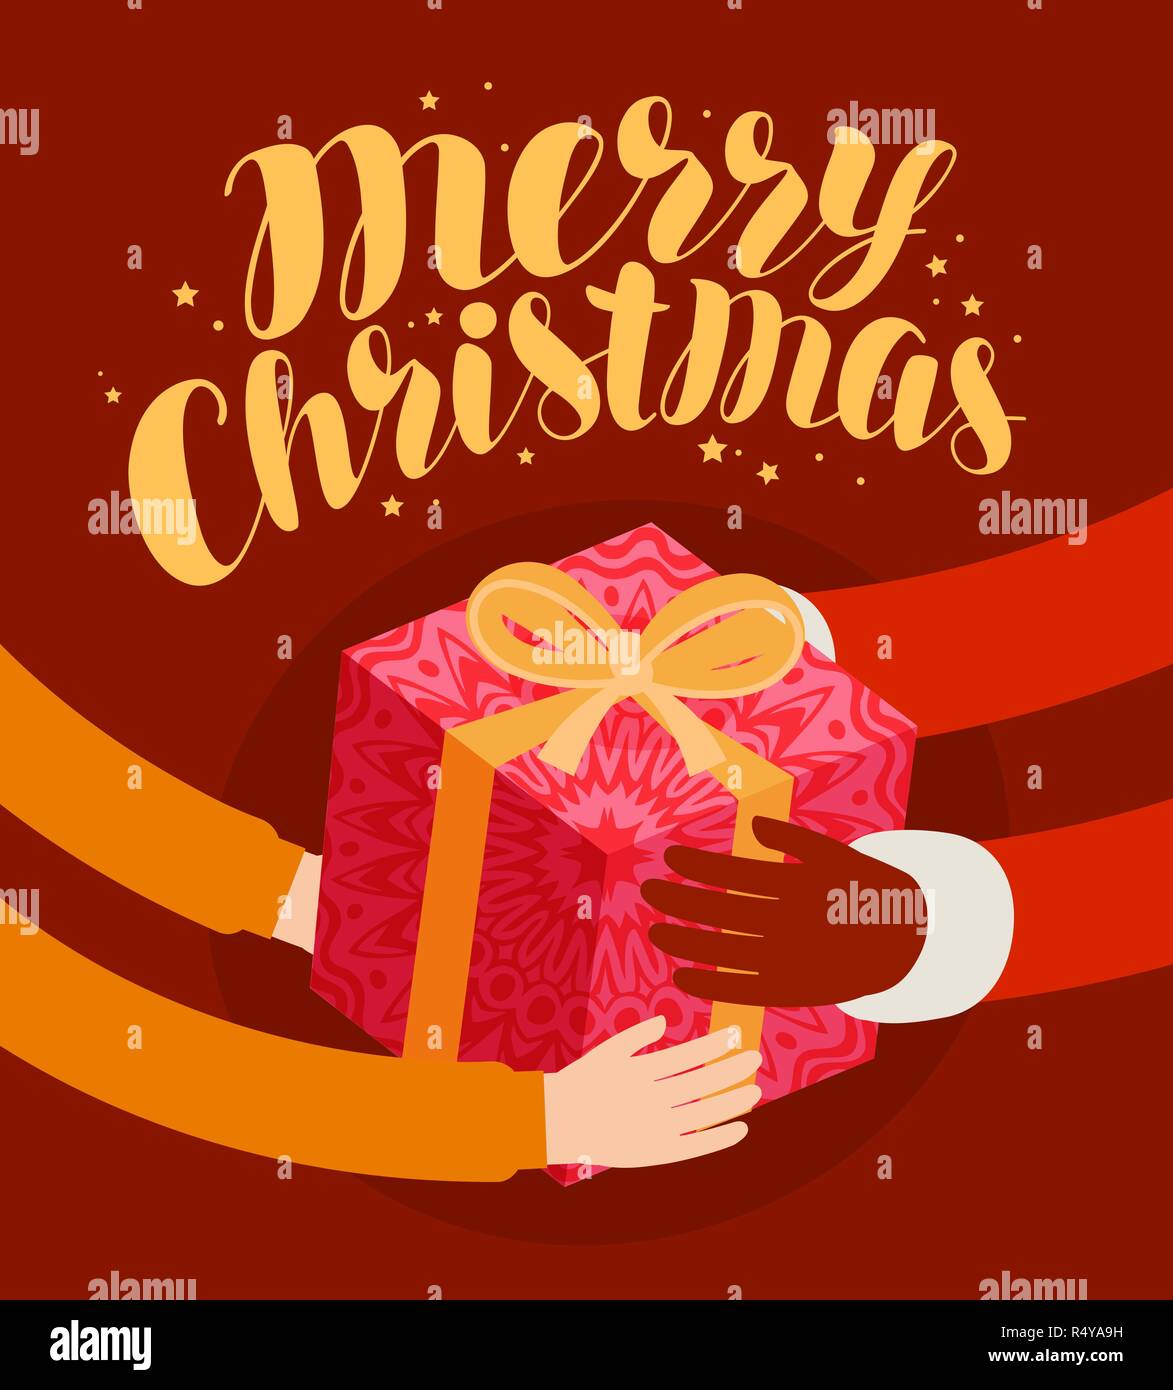 Merry Christmas, banner. Celebration, holiday concept. Vector illustration Stock Vector